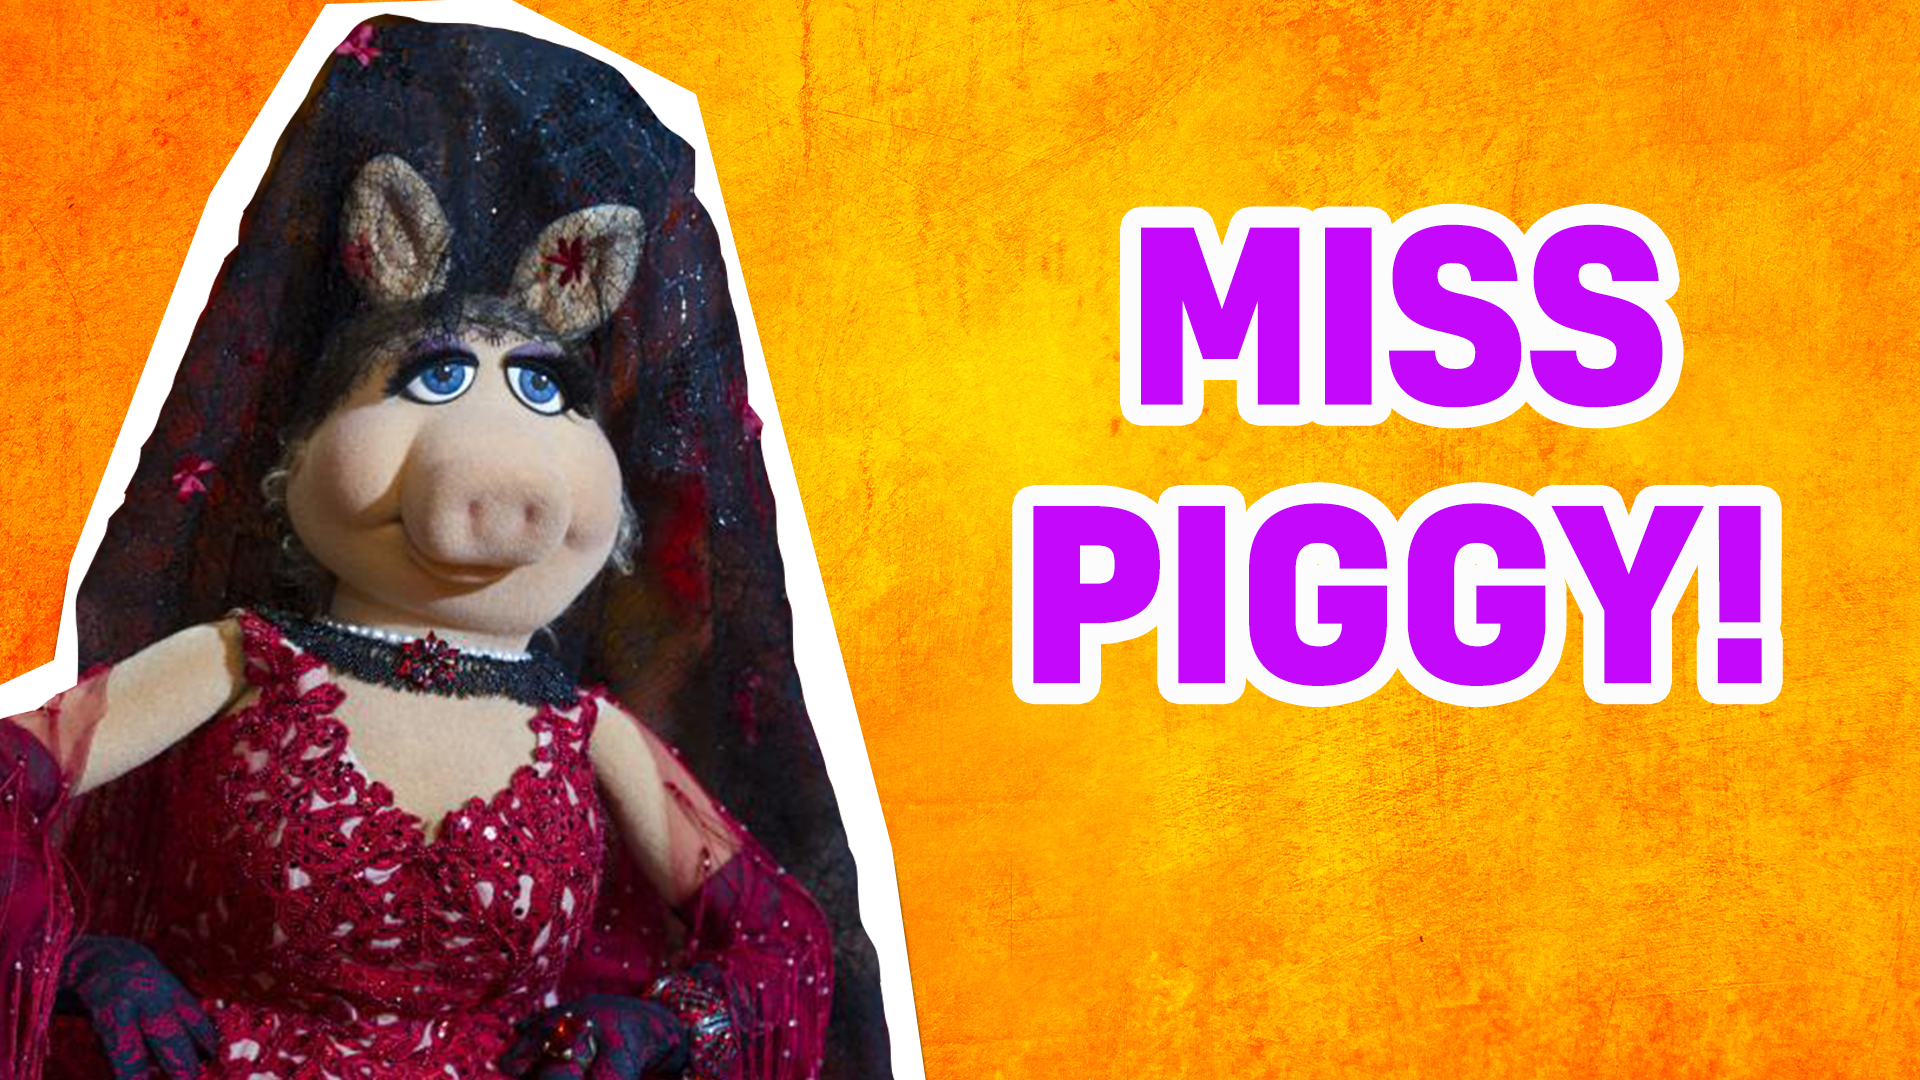 You're Miss Piggy! You're fabulous and fashion forward! When you walk into a room, EVERYONE has to know about it! But under your big diva behaviour, you also have a big heart!